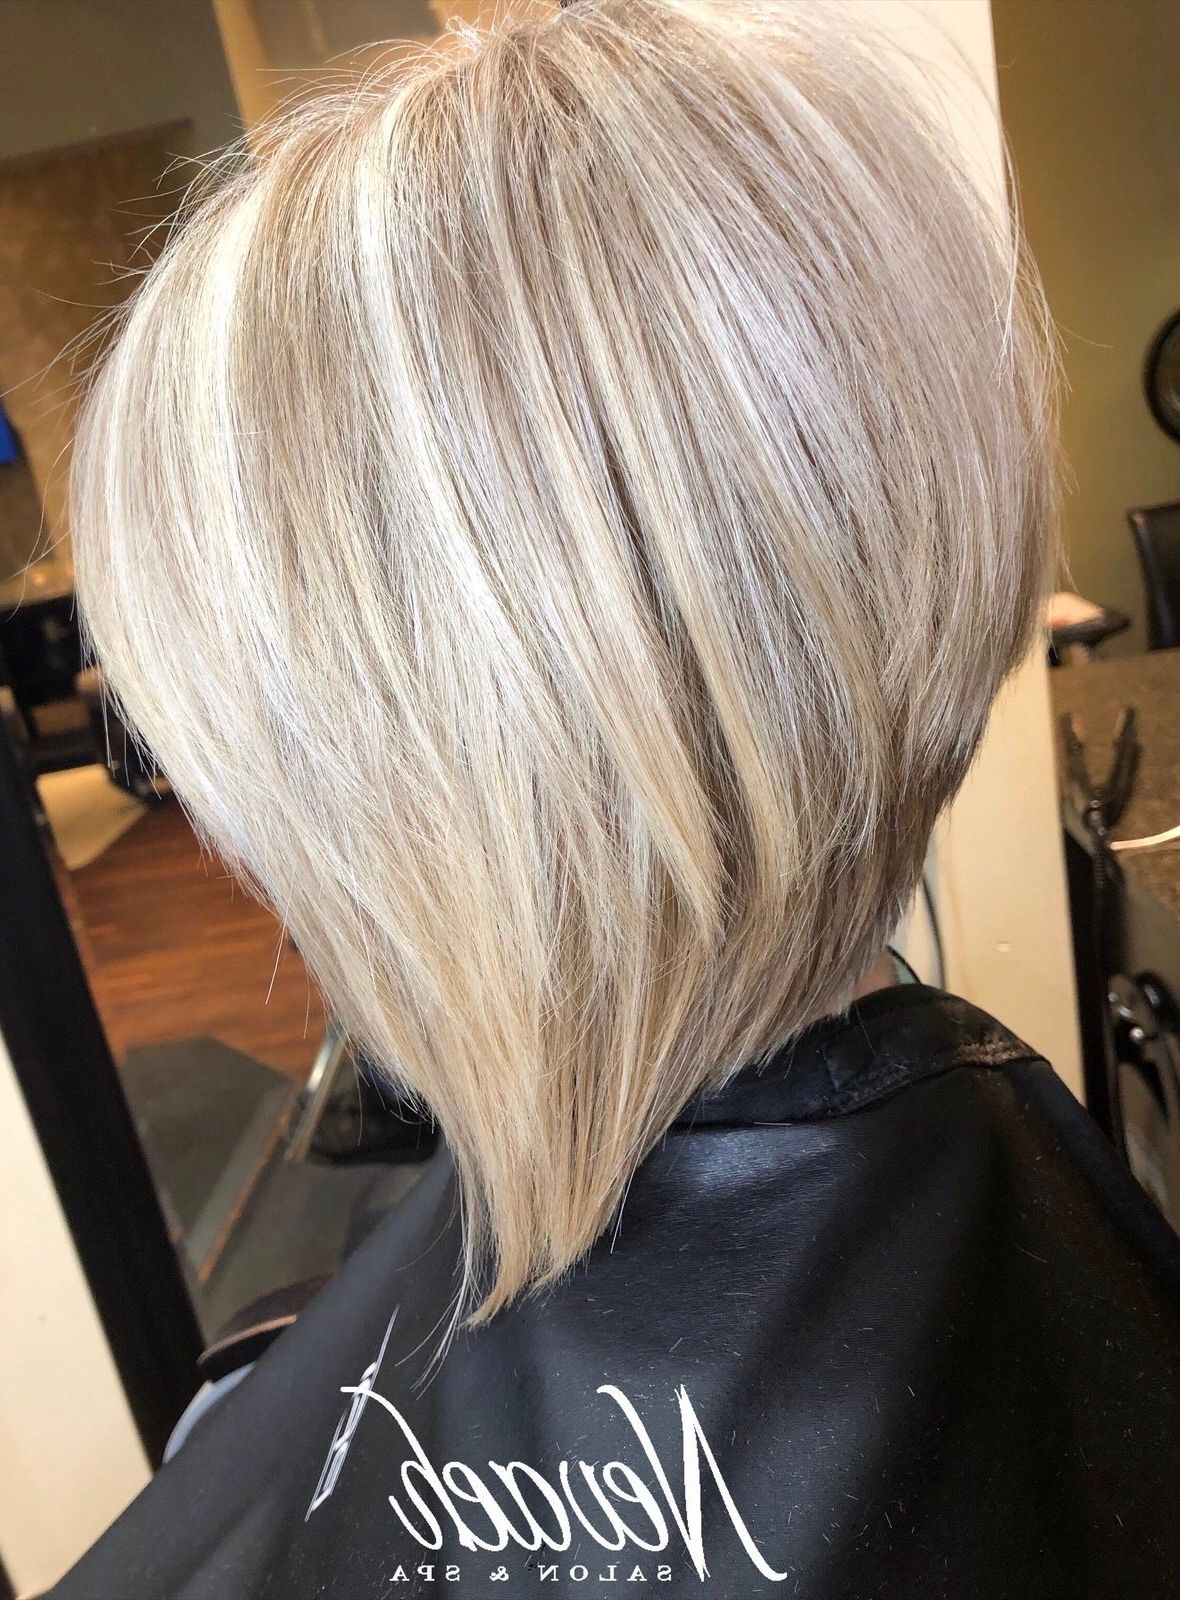 Pin On Nevaeh Salon & Spa Within Current Icy Blonde Inverted Bob Haircuts (View 4 of 25)